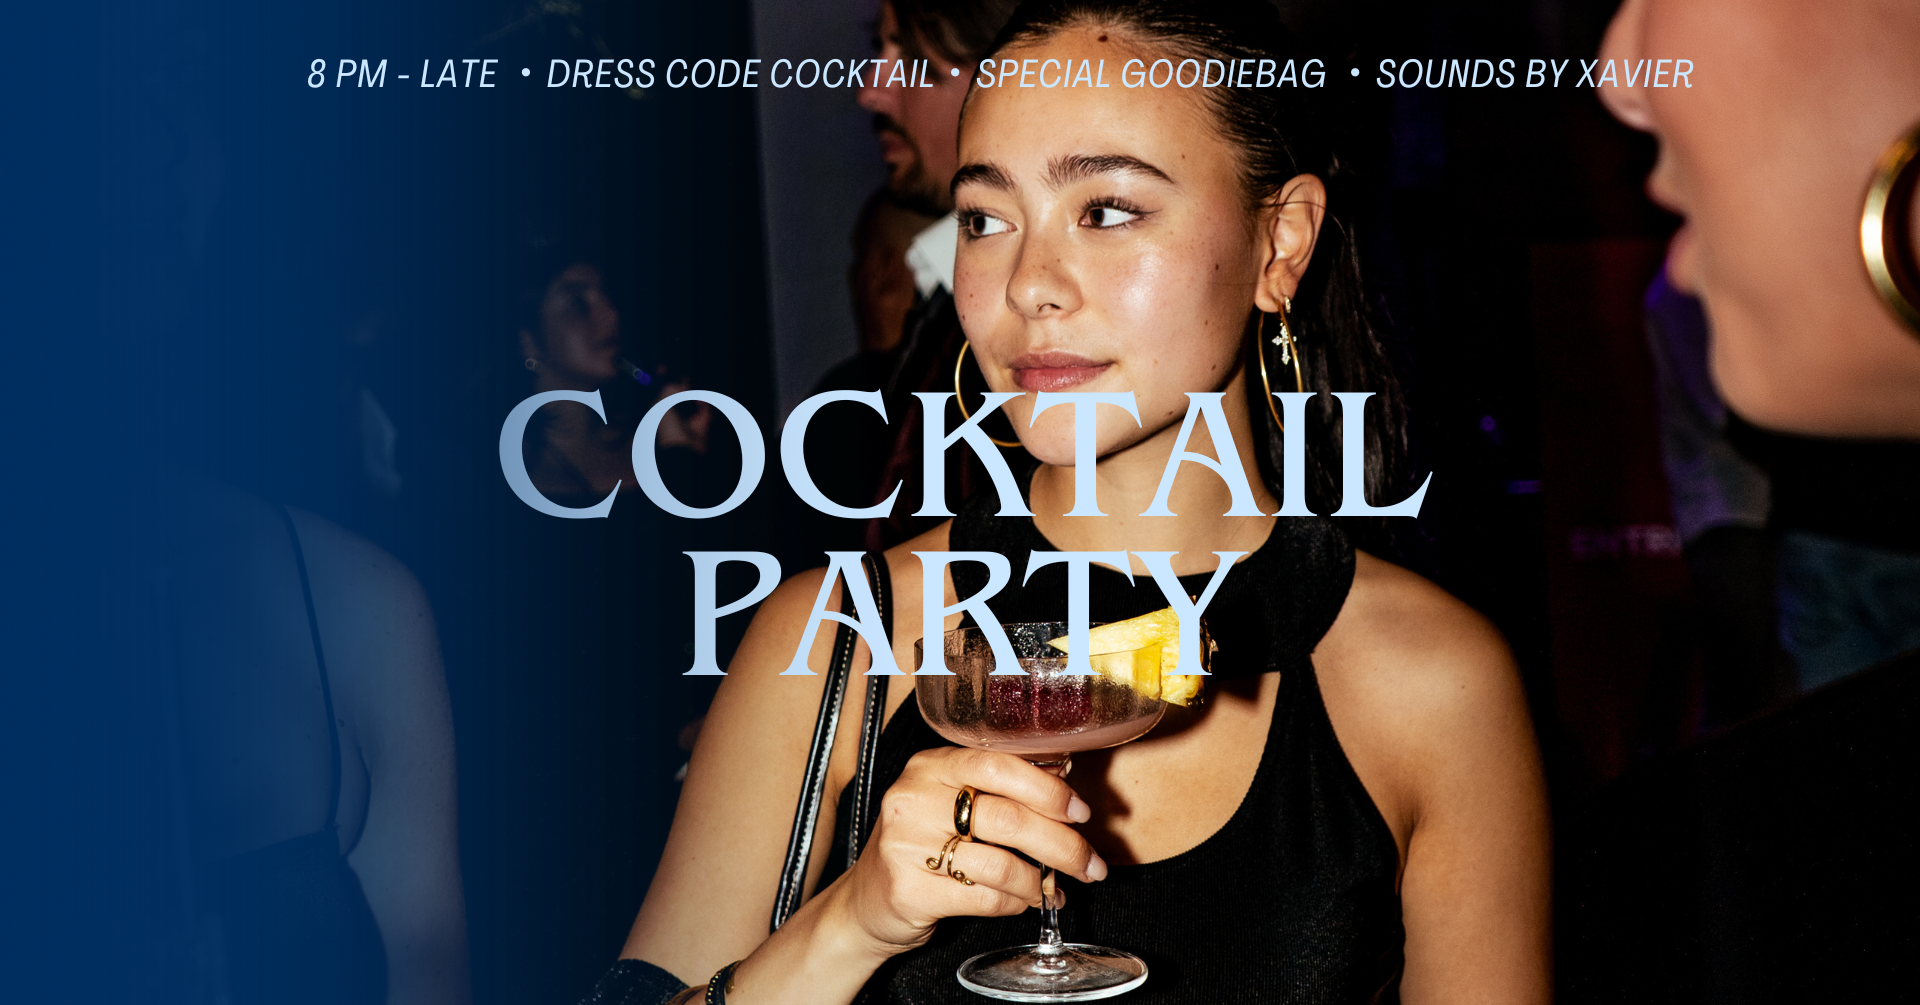 Exclusive cocktail party at Supper Intimate